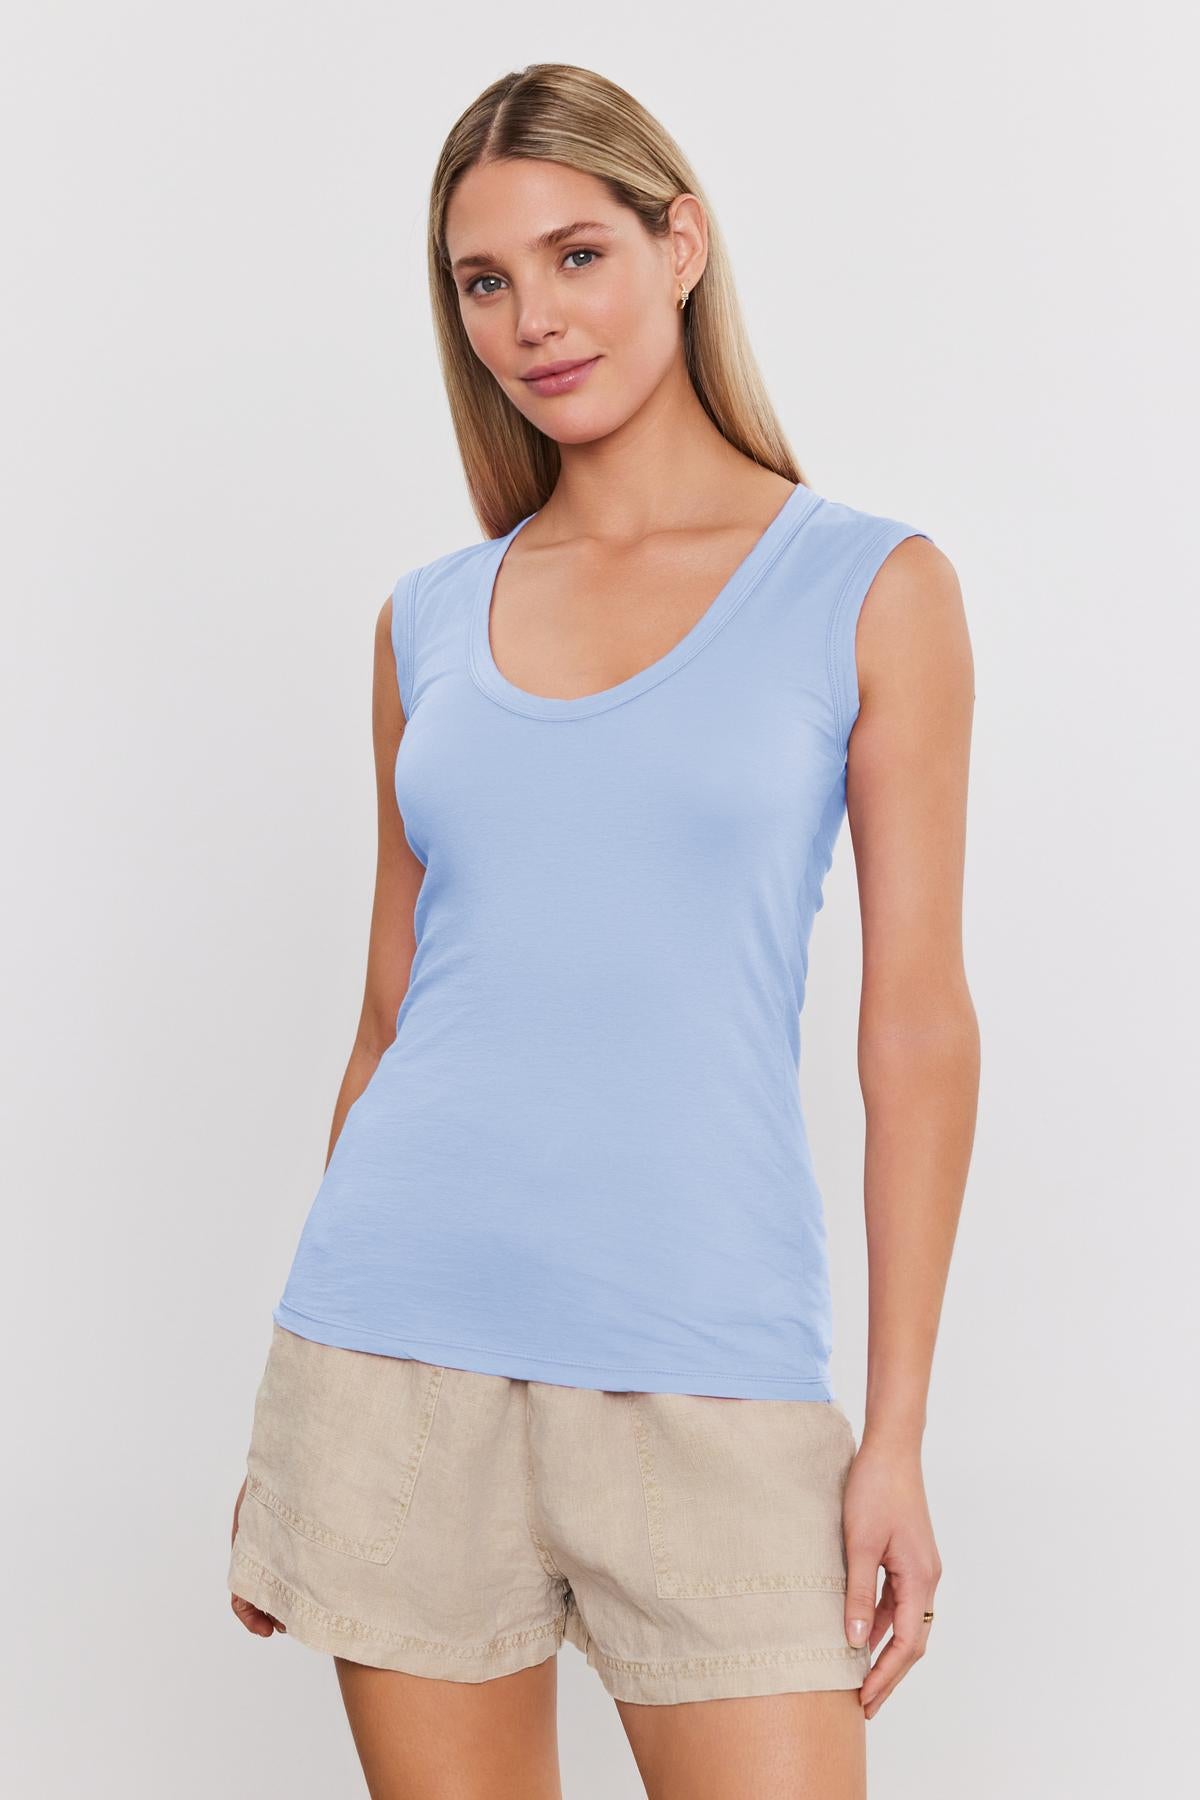   Woman in an ESTINA TANK TOP by Velvet by Graham & Spencer and beige shorts stands against a plain white background, looking at the camera with a neutral expression. 